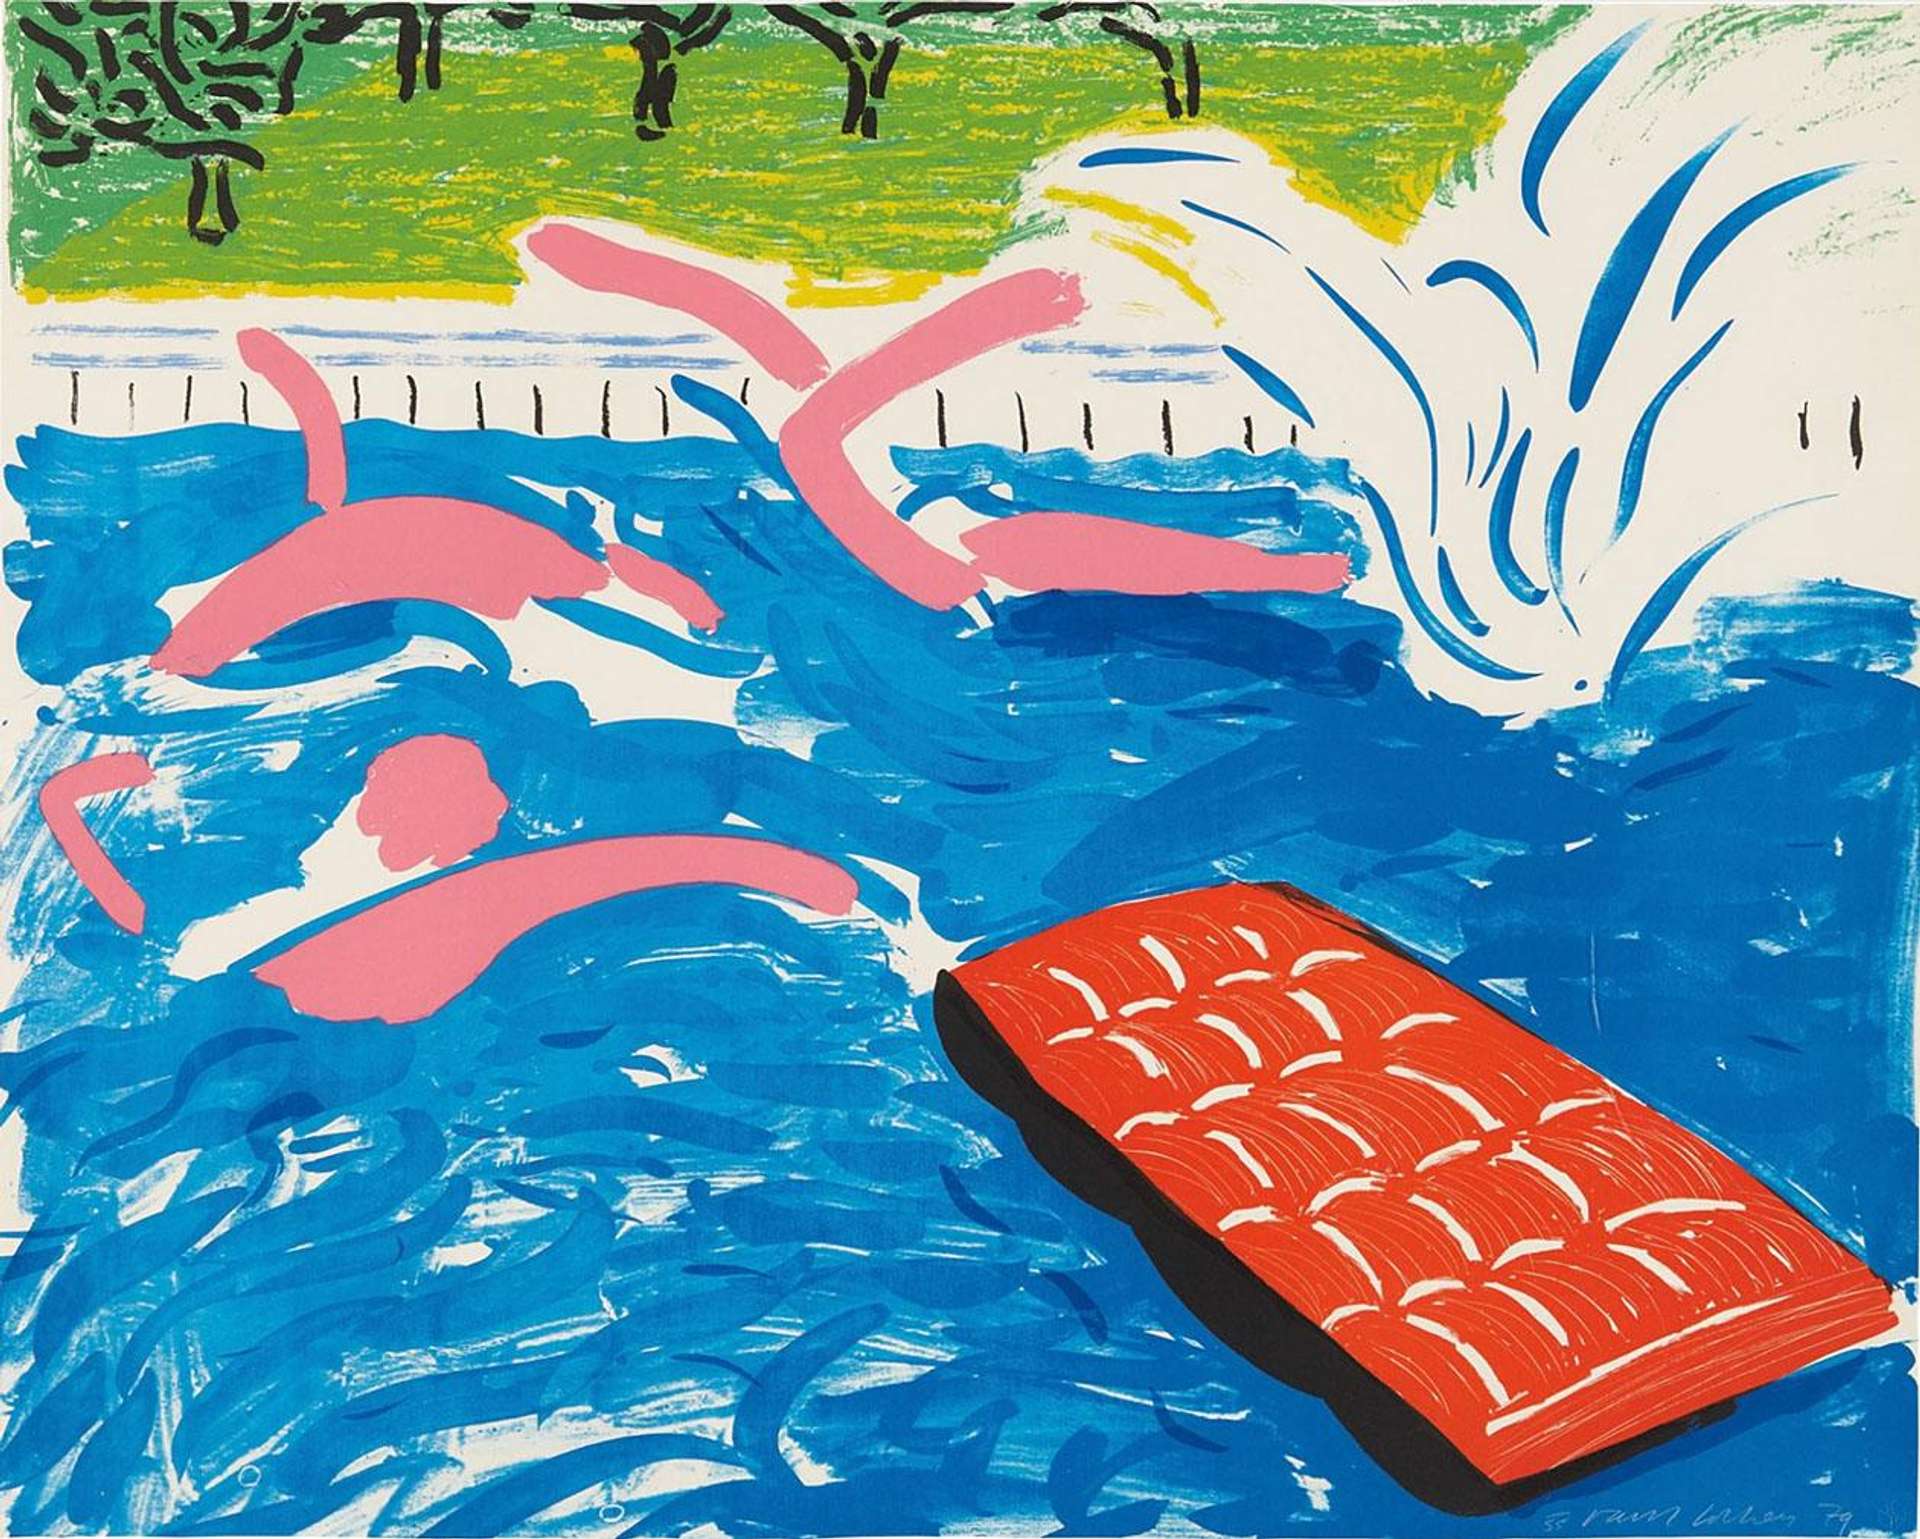 David Hockney’s Afternoon Swimming. A lithograph of three pink abstract figures swimming in vivid blue waters in a swimming pool. The landscape is bright green and there is a red floatation mat in the pool. 